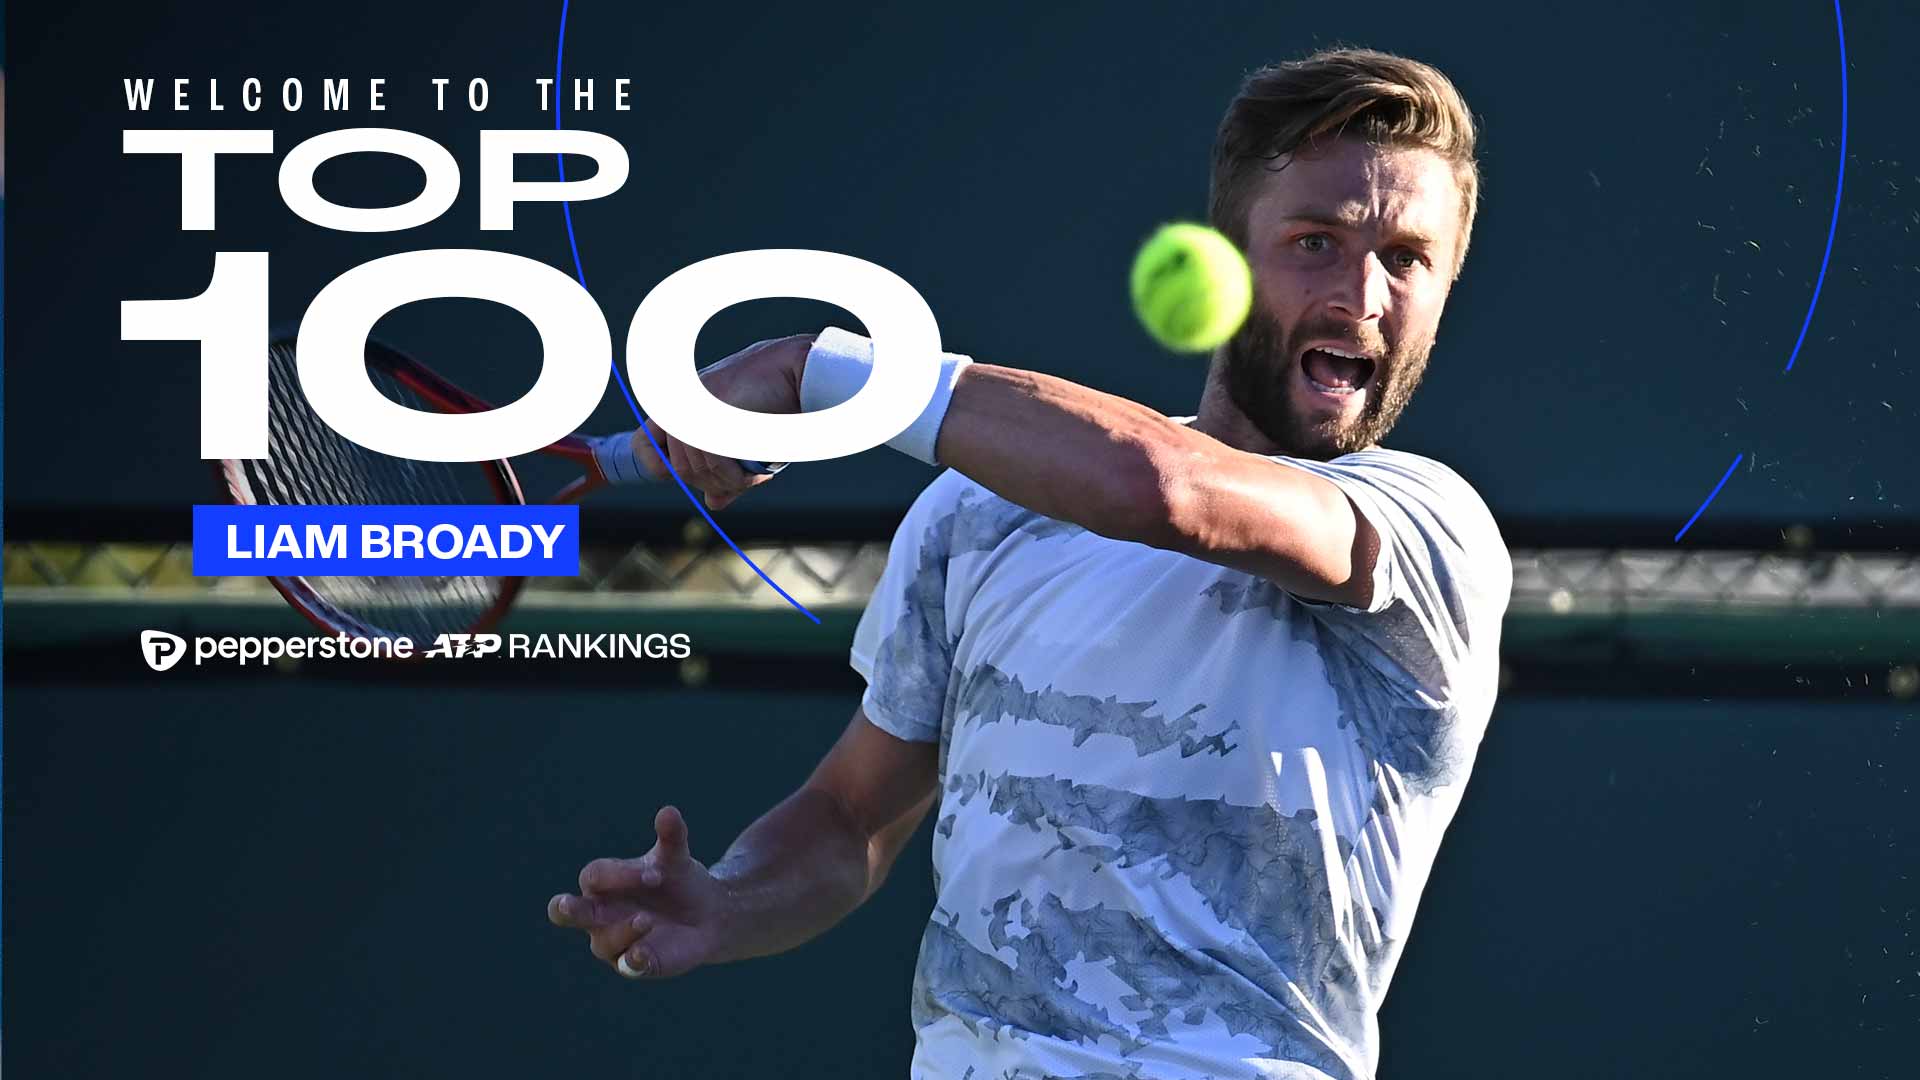 Liam Broady breaks into the Top 100 in the Pepperstone ATP Rankings for the first time aged 29.